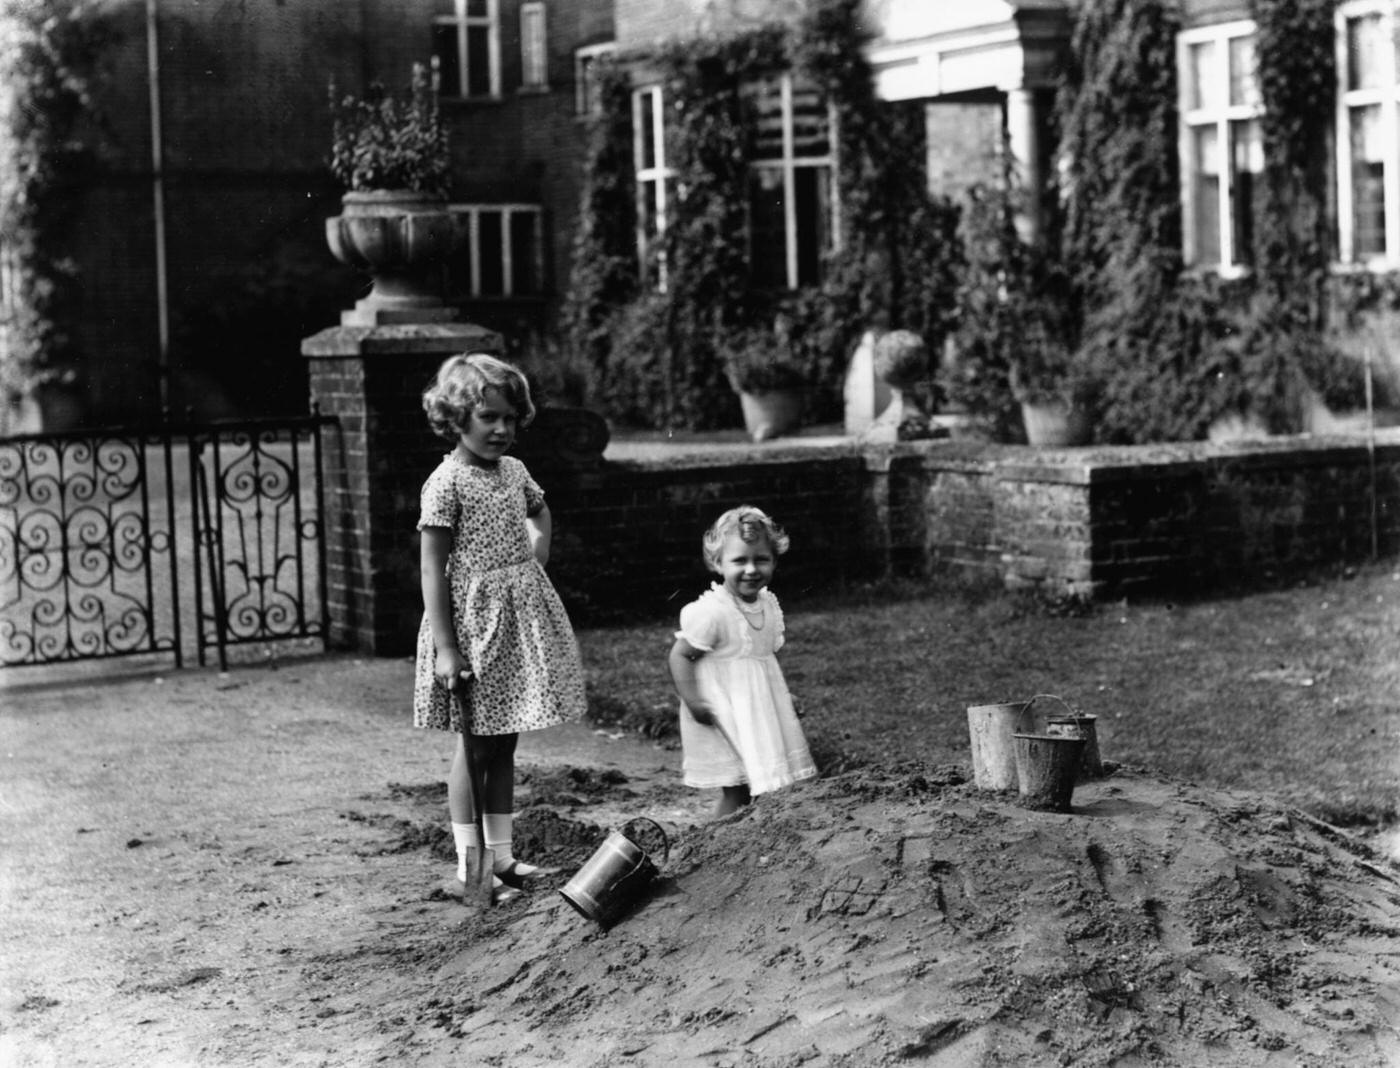 Princess Elizabeth (left) and Princess Margaret playing together outdoors beside a pile of sand, August 12th 1932.